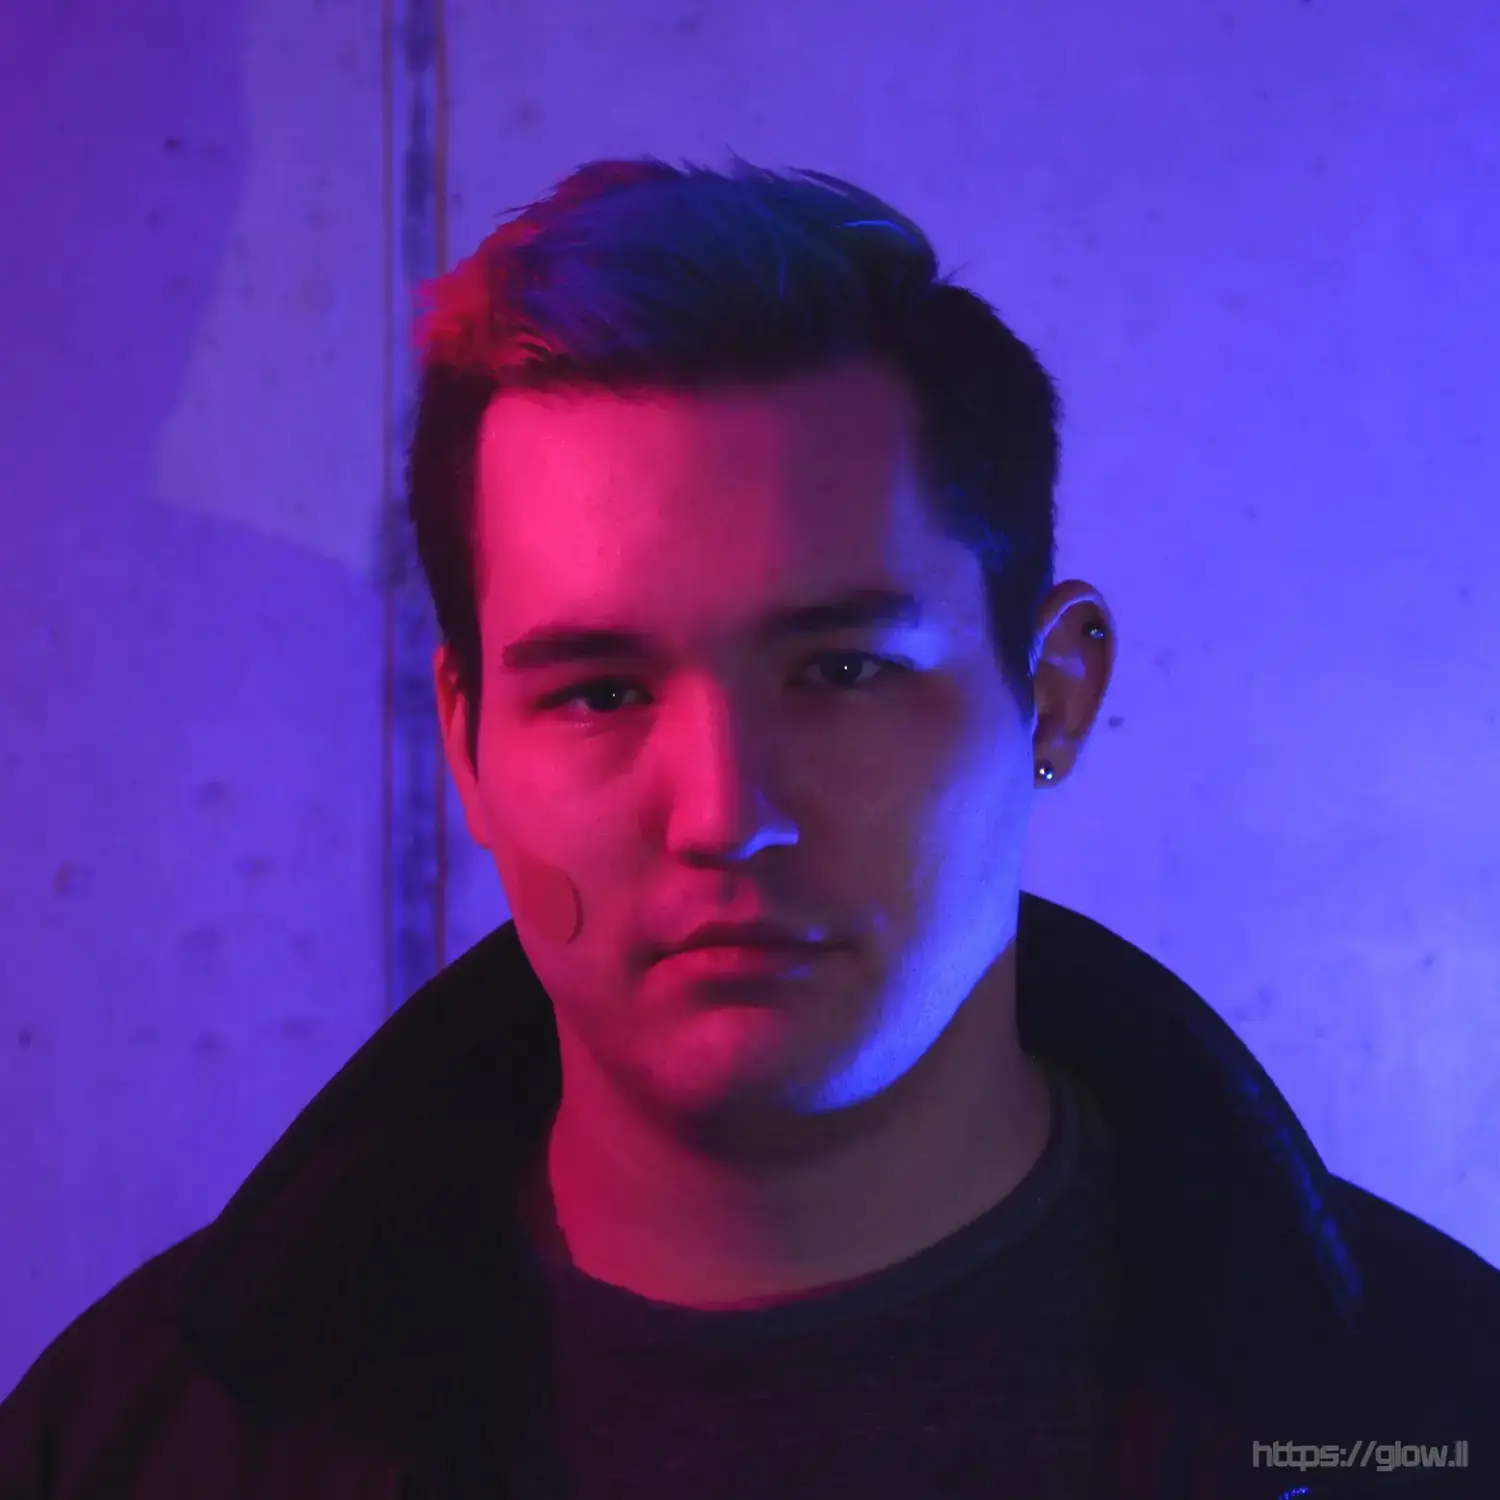 Photo of me with cyan and magenta lighting